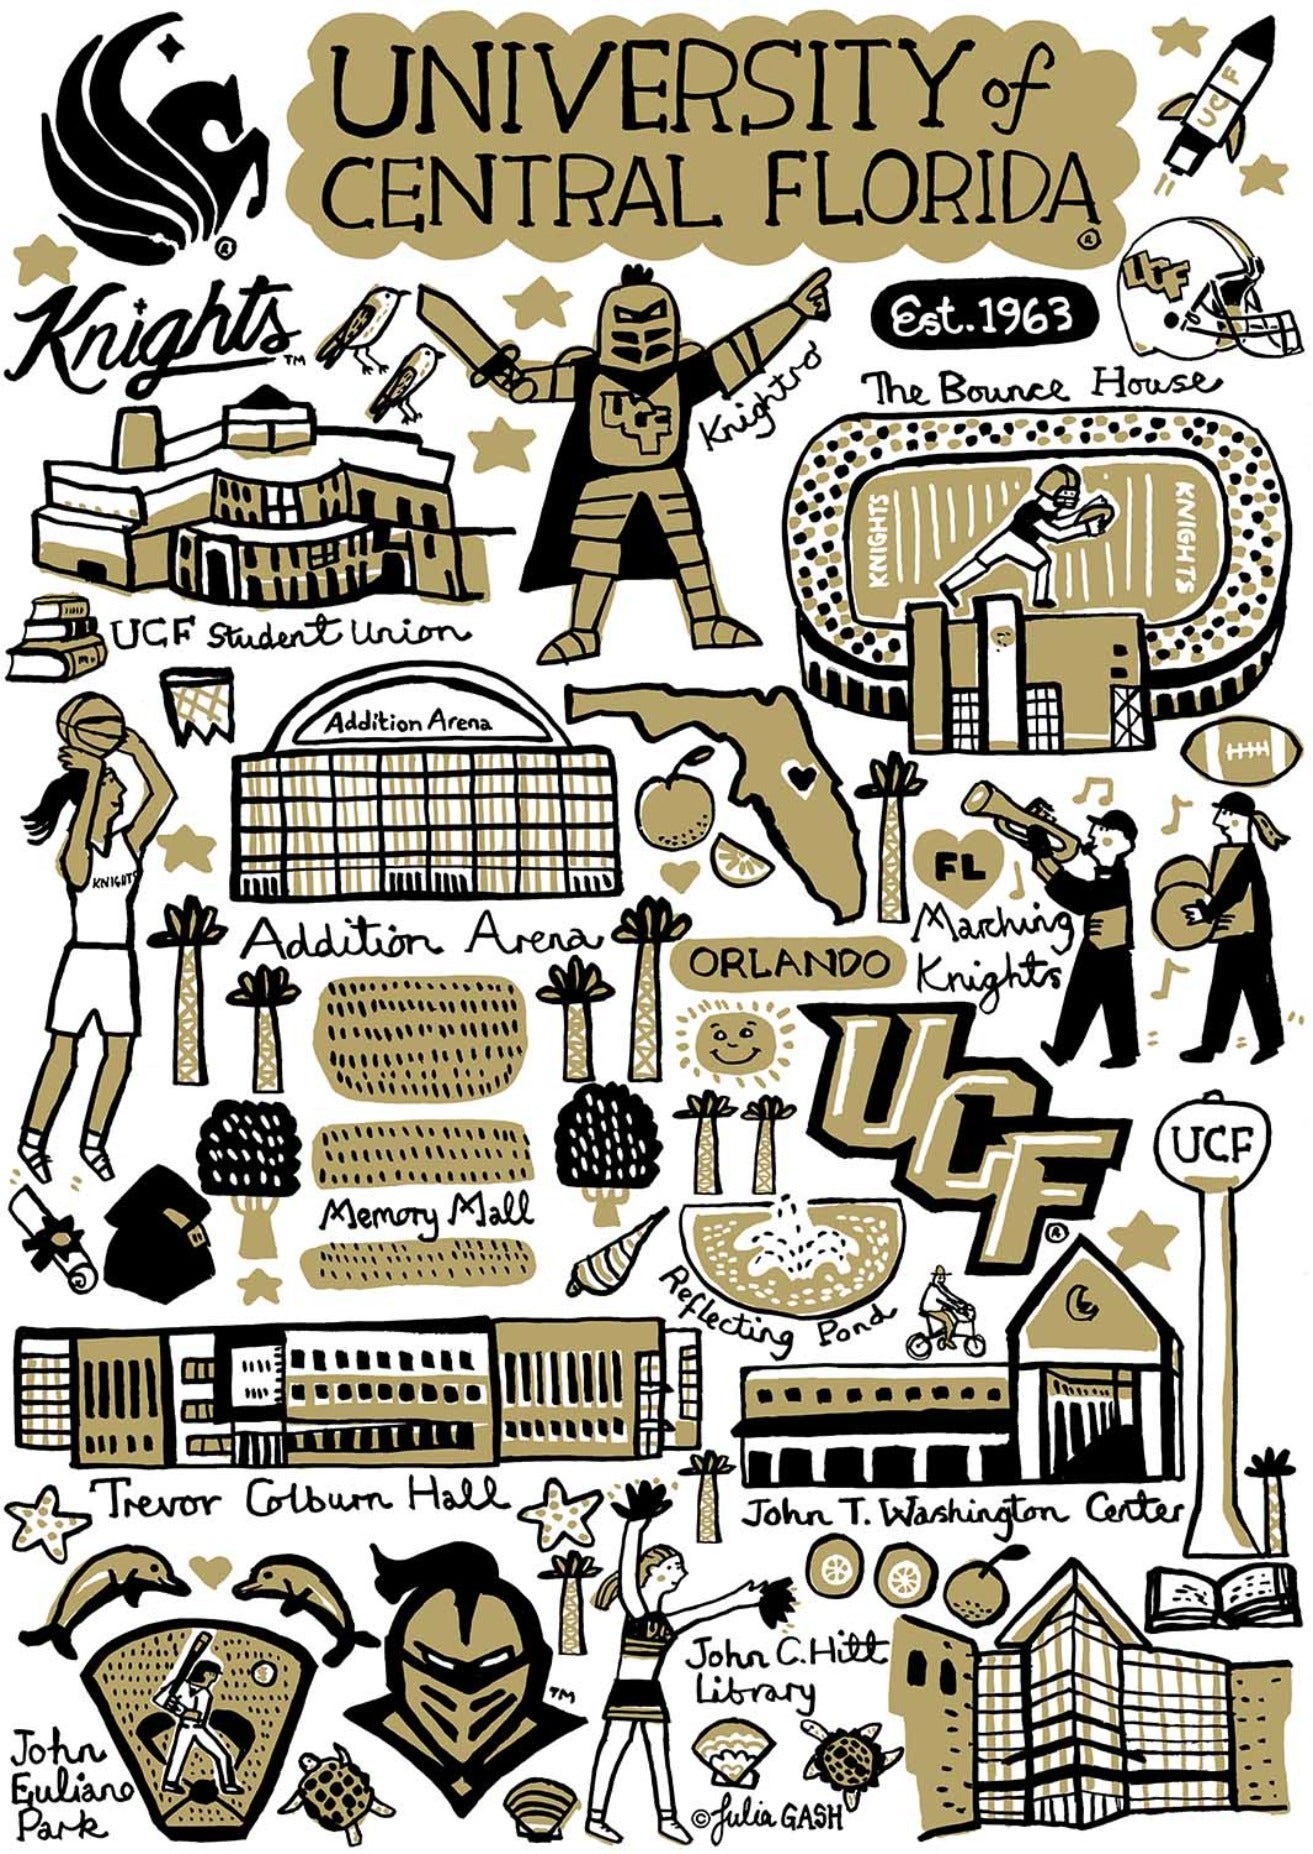 University of Central Florida by Julia Gash